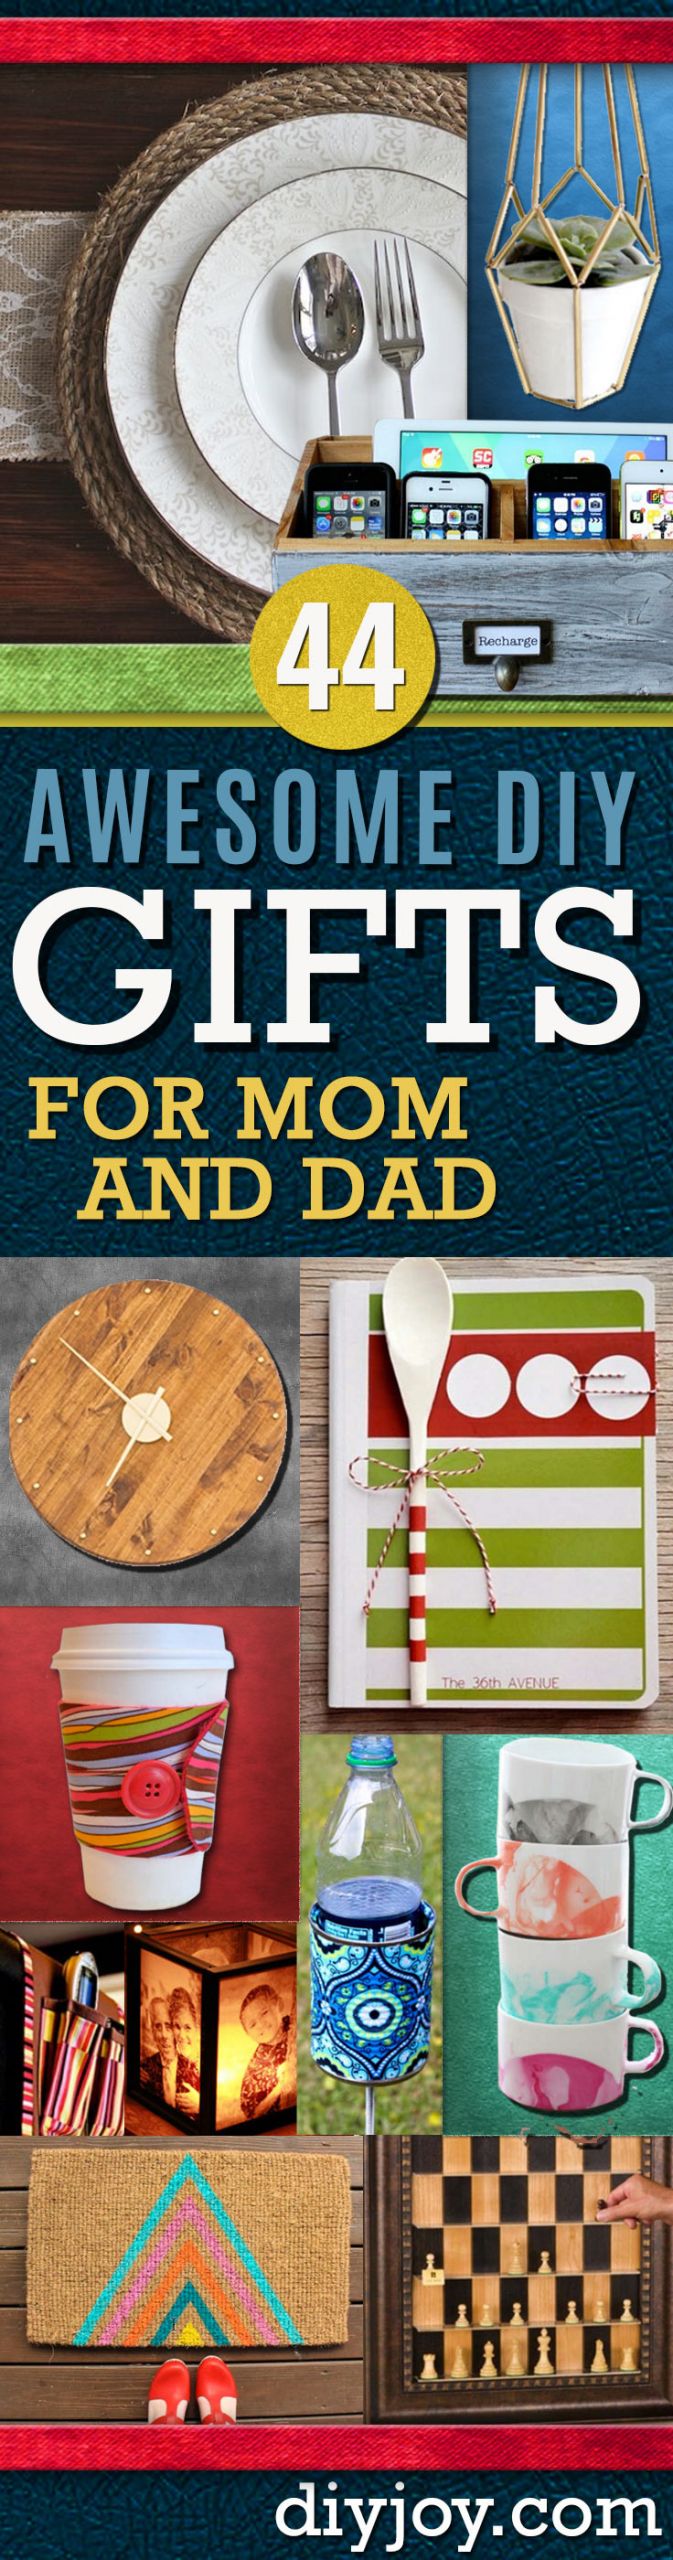 DIY Christmas Gifts For Mom
 Awesome DIY Gift Ideas Mom and Dad Will Love